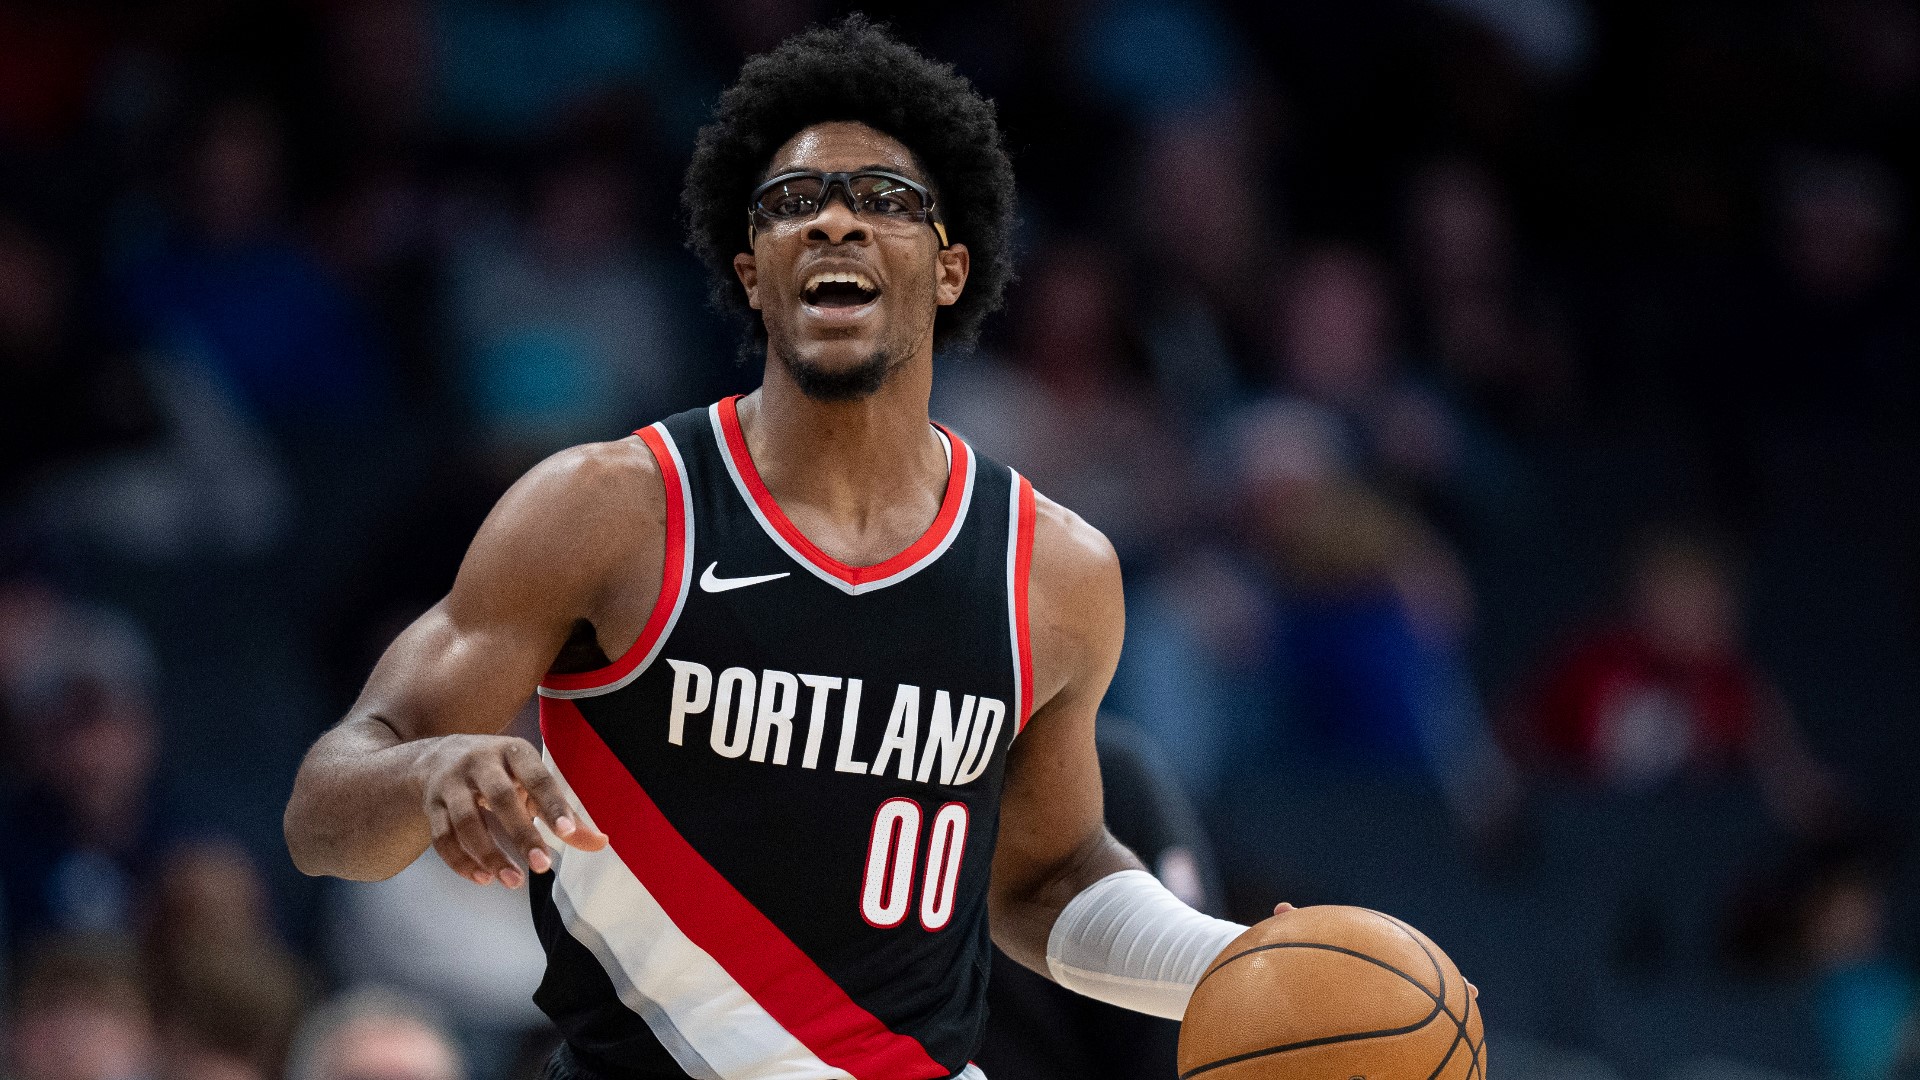 Portland Trail Blazers rookie guard Scoot Henderson discusses his first season in the NBA and his plans for the offseason.